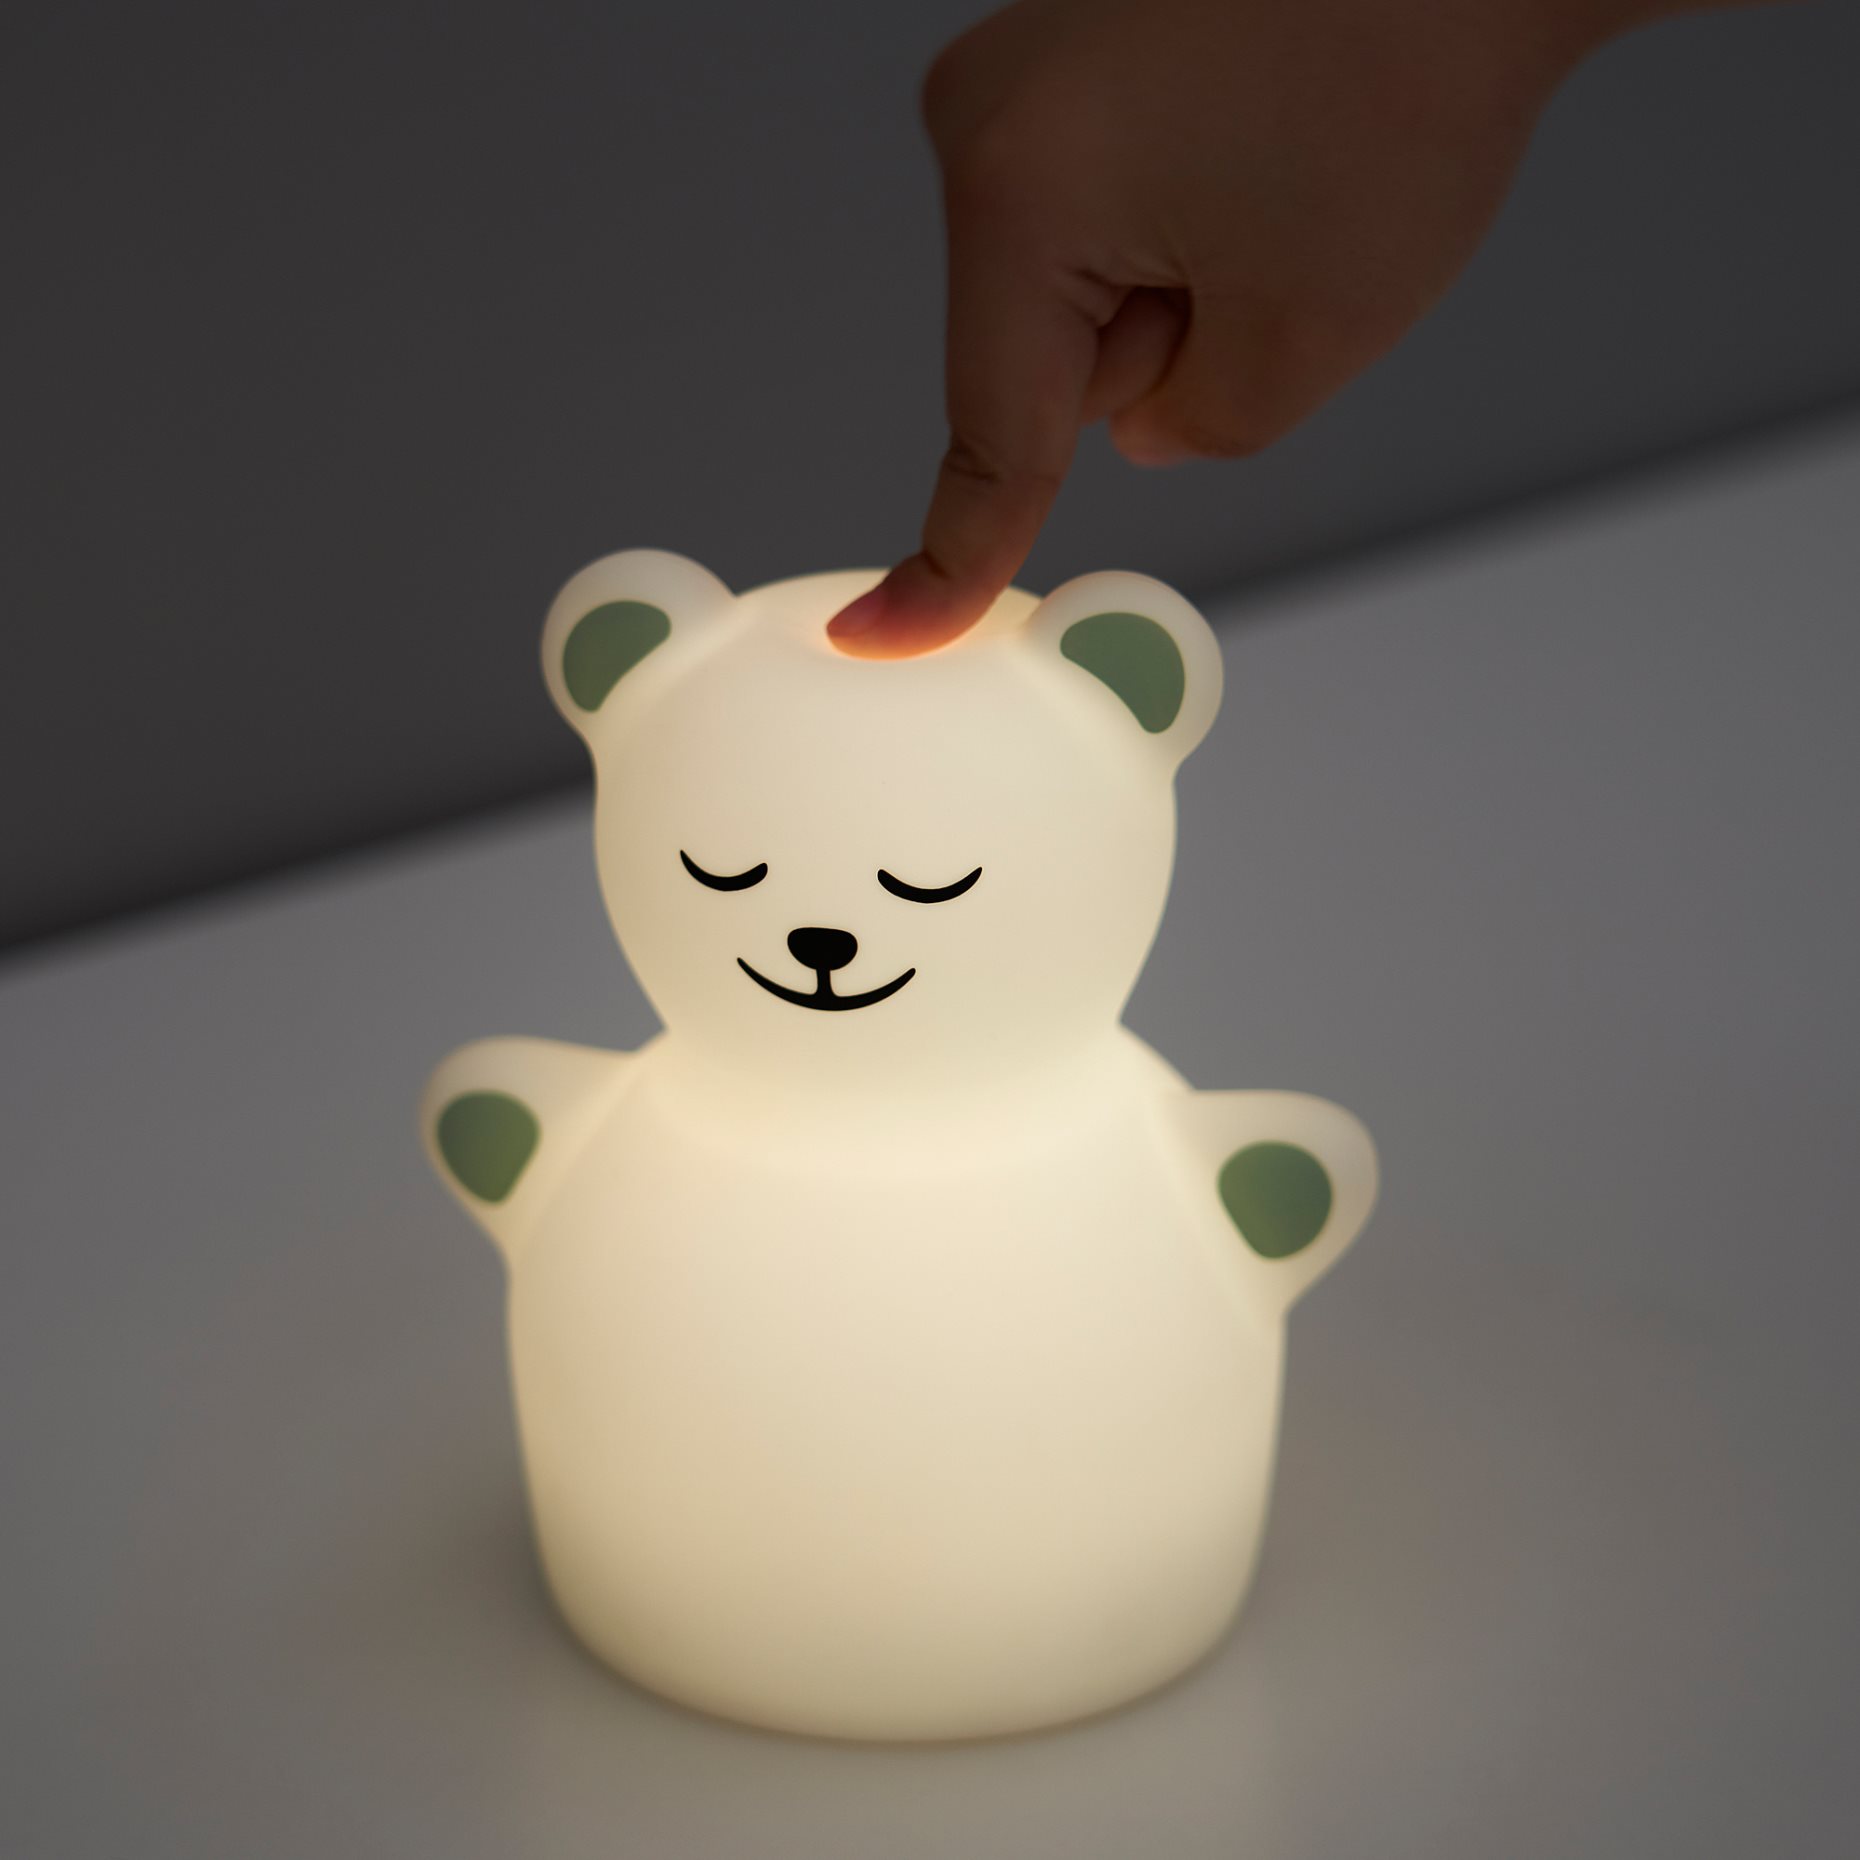 TÖVÄDER, night light with built-in LED light source/bear/battery-operated, 905.169.14